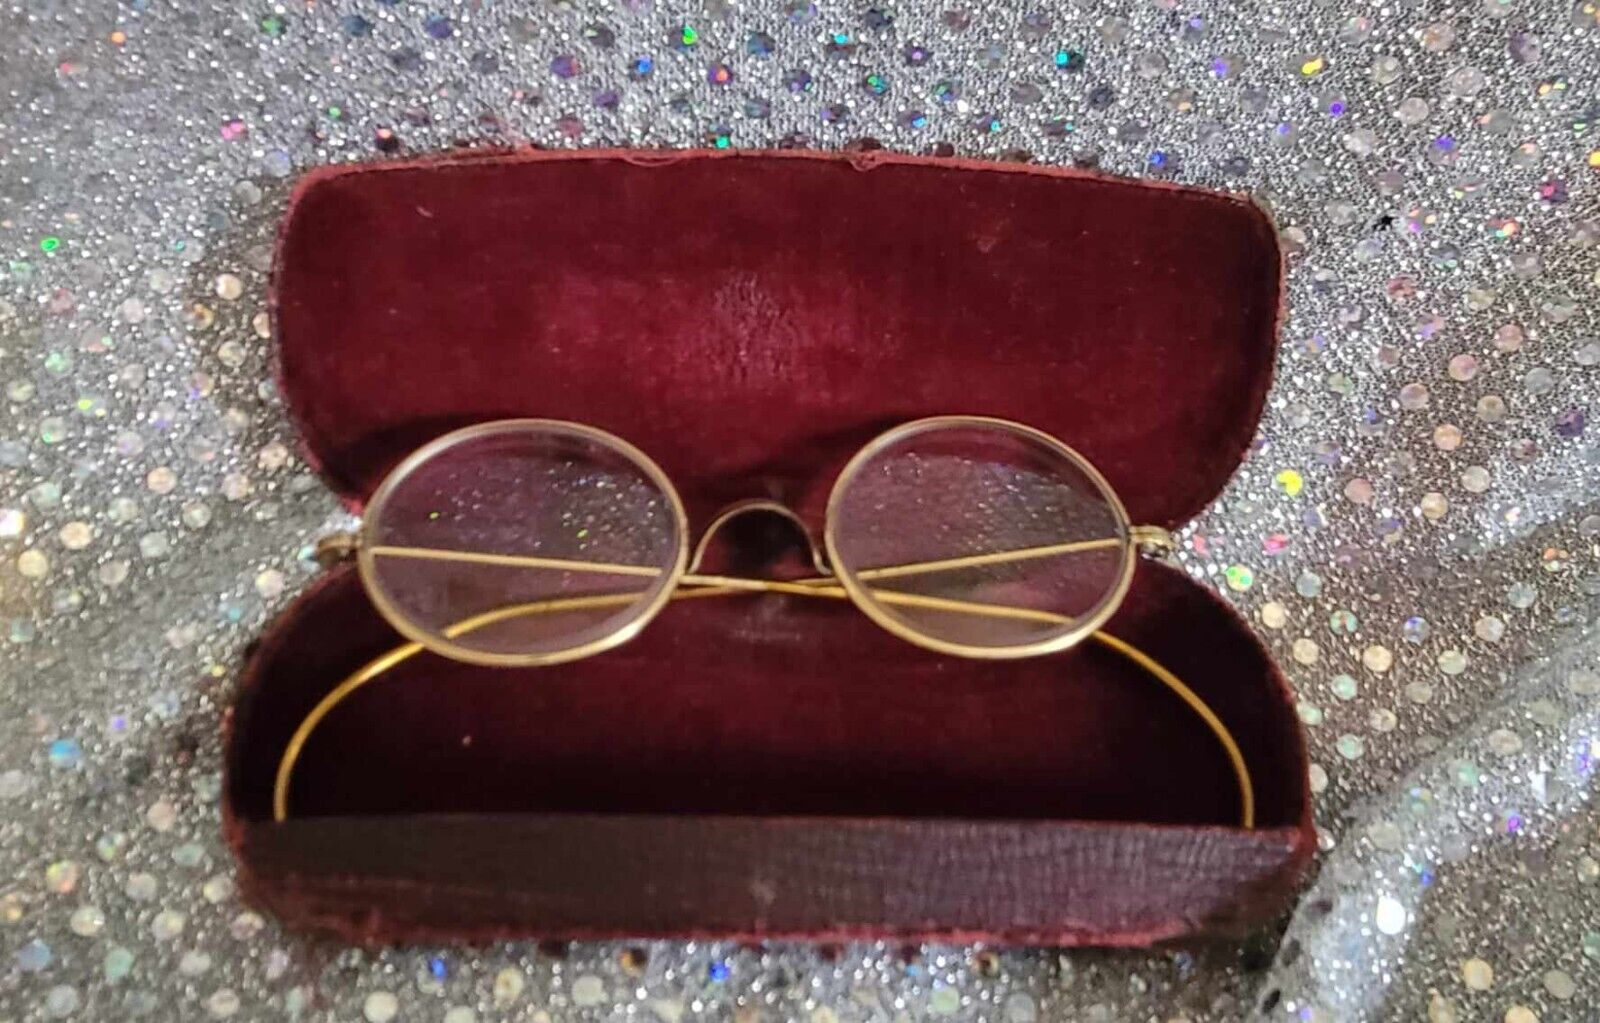 Rare Antique Victorian Gold Plated Magnifying Glasses - Spectacles Circa 1900